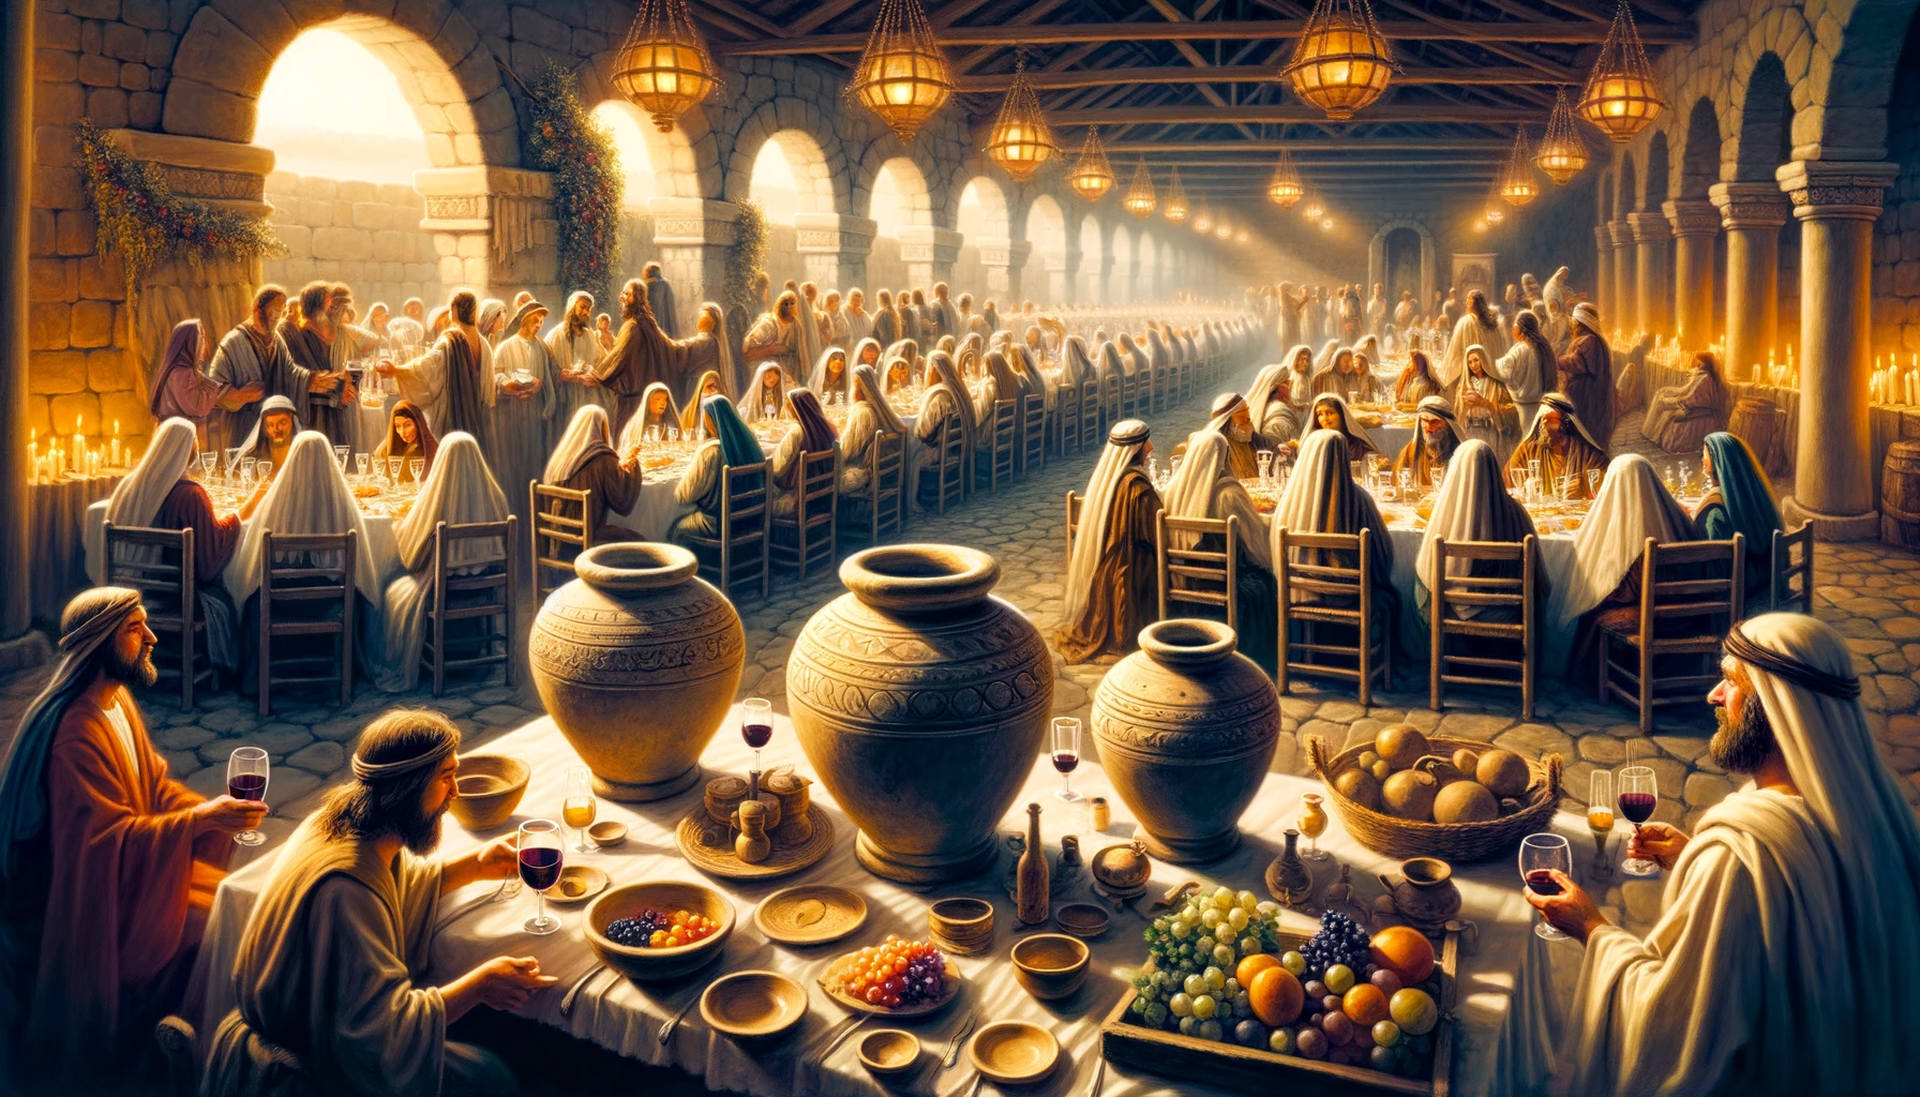 a tableau of the Wedding at Cana, focusing on the water jars used by Jesus to turn water into wine, set against a backdrop of a joyous biblical feast, blending historical accuracy with artistic creativity. - umut taydas